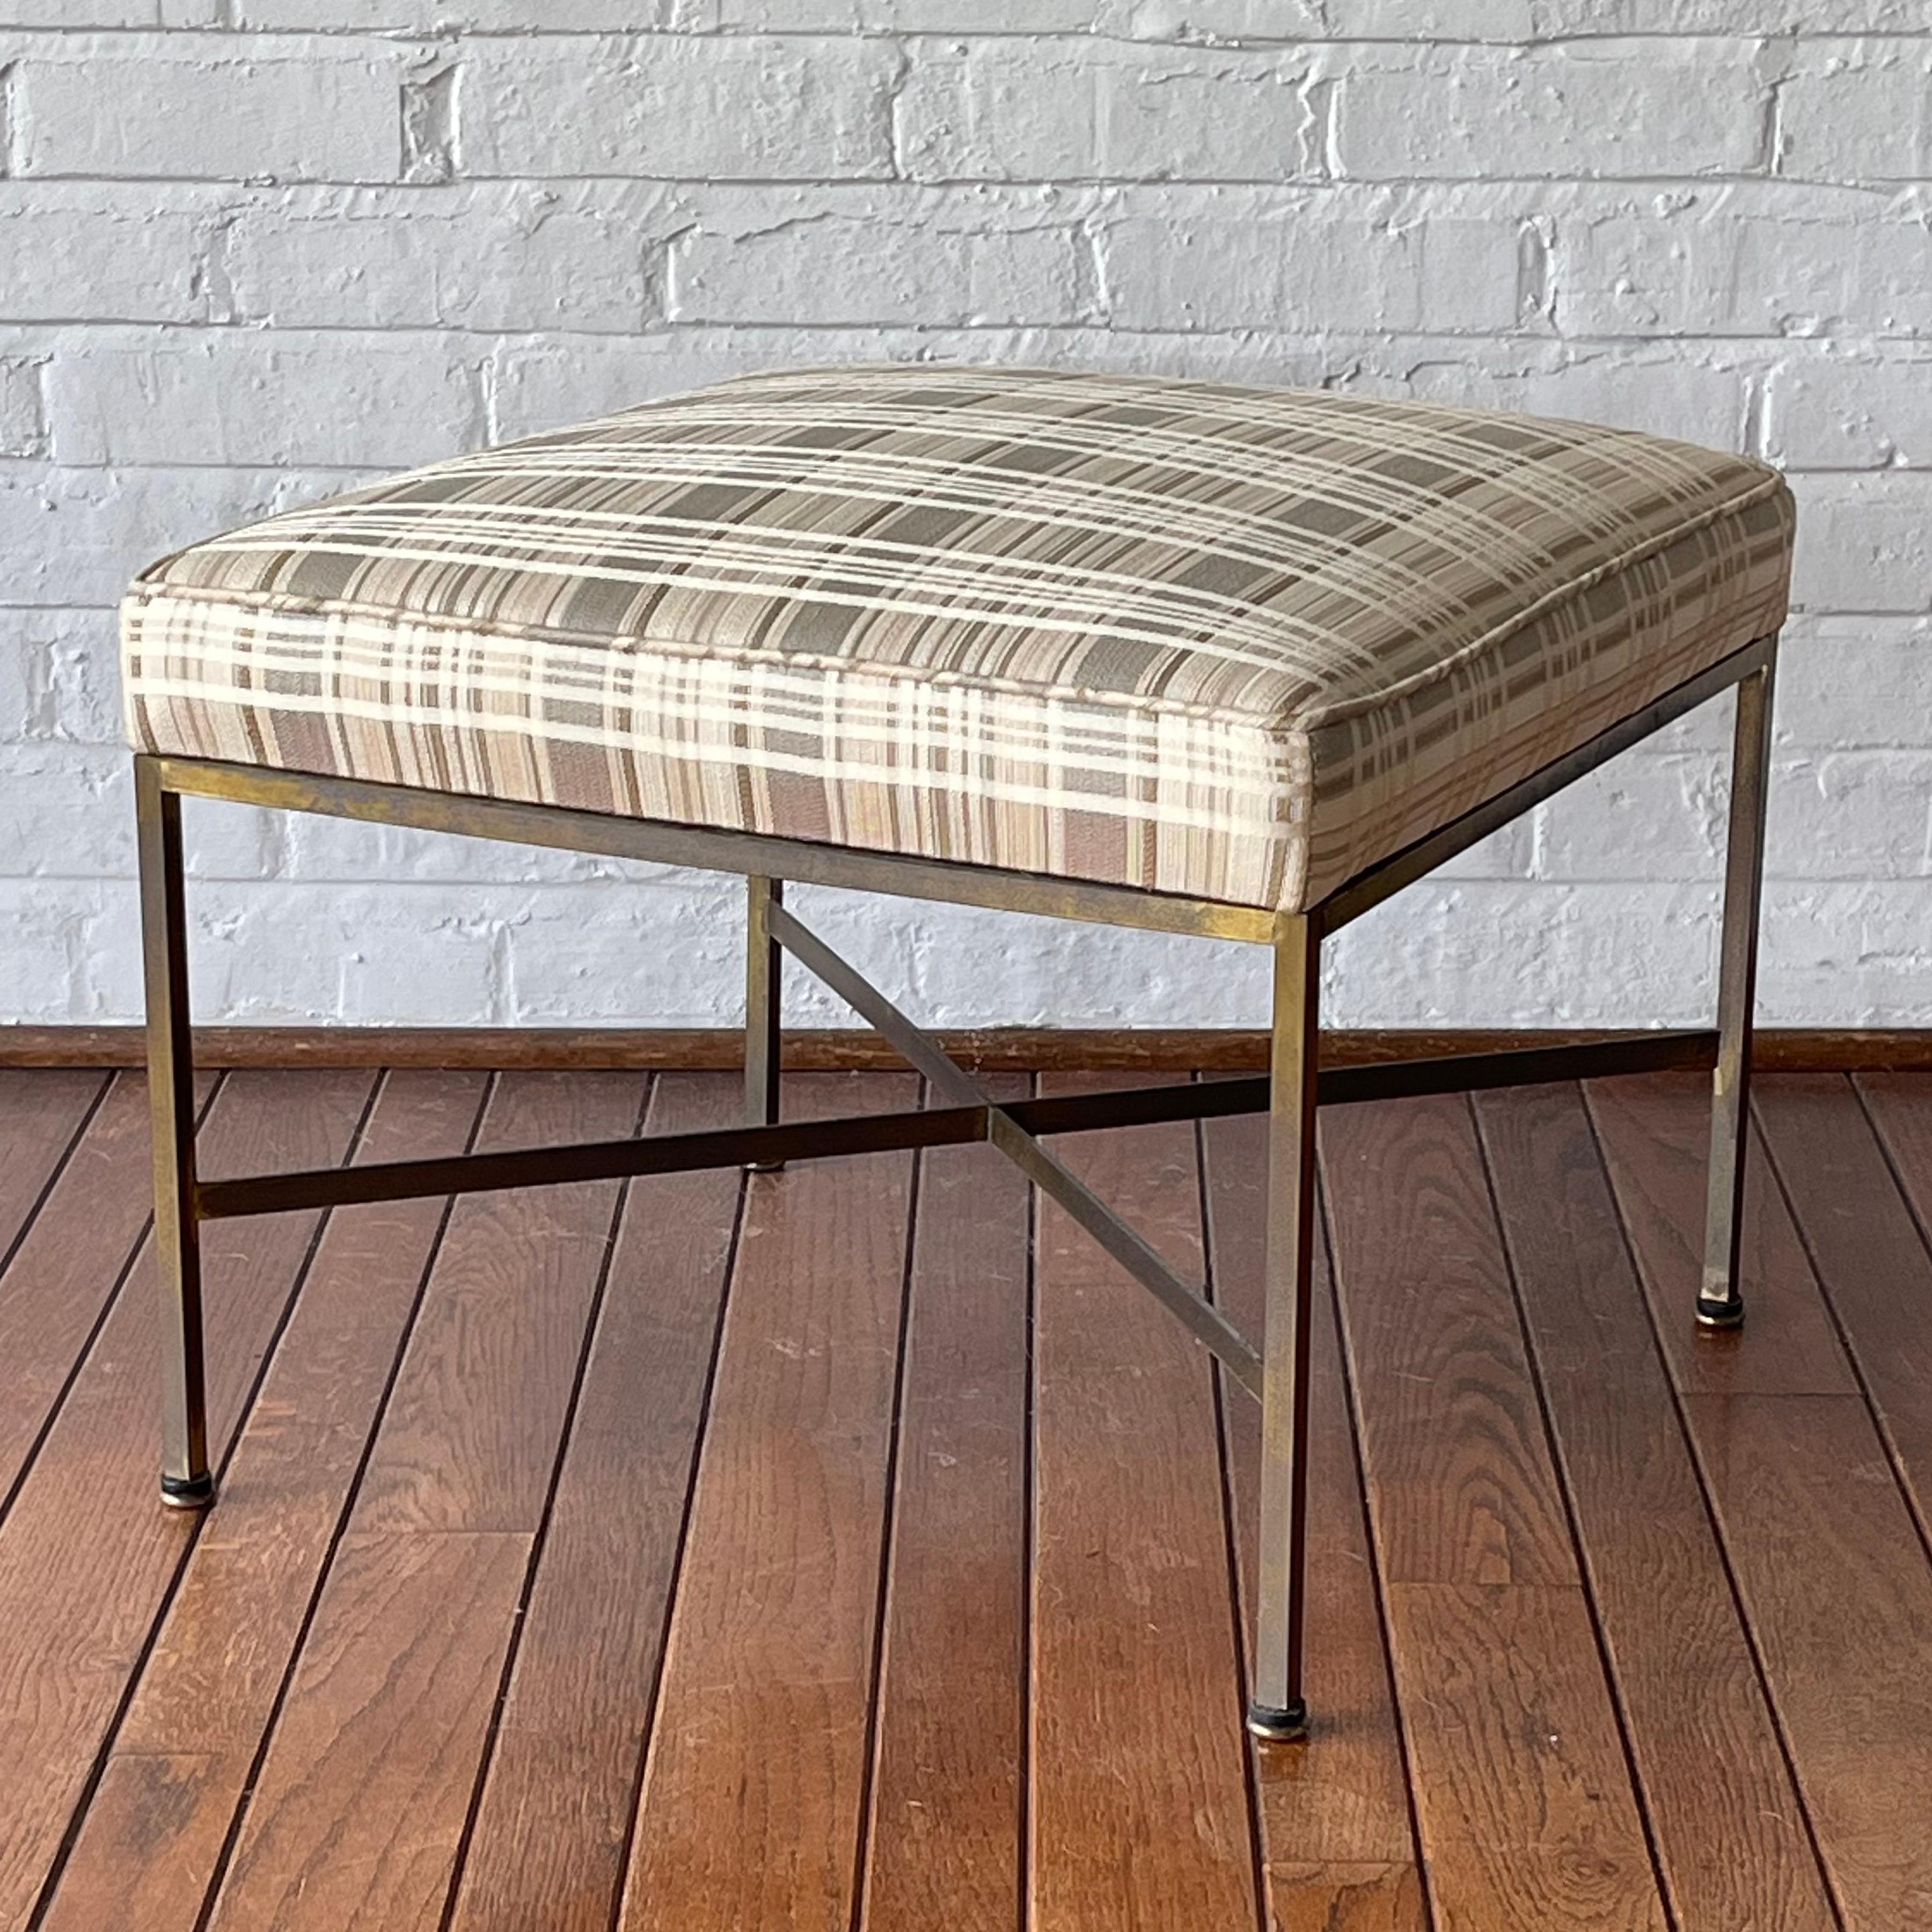 A Paul McCobb classic, his X-base stool, is a timeless design: elegant without being fussy, refined without feeling precious, and like so much of McCobb's work, perfectly proportioned. 

This example is in good original vintage condition, the base